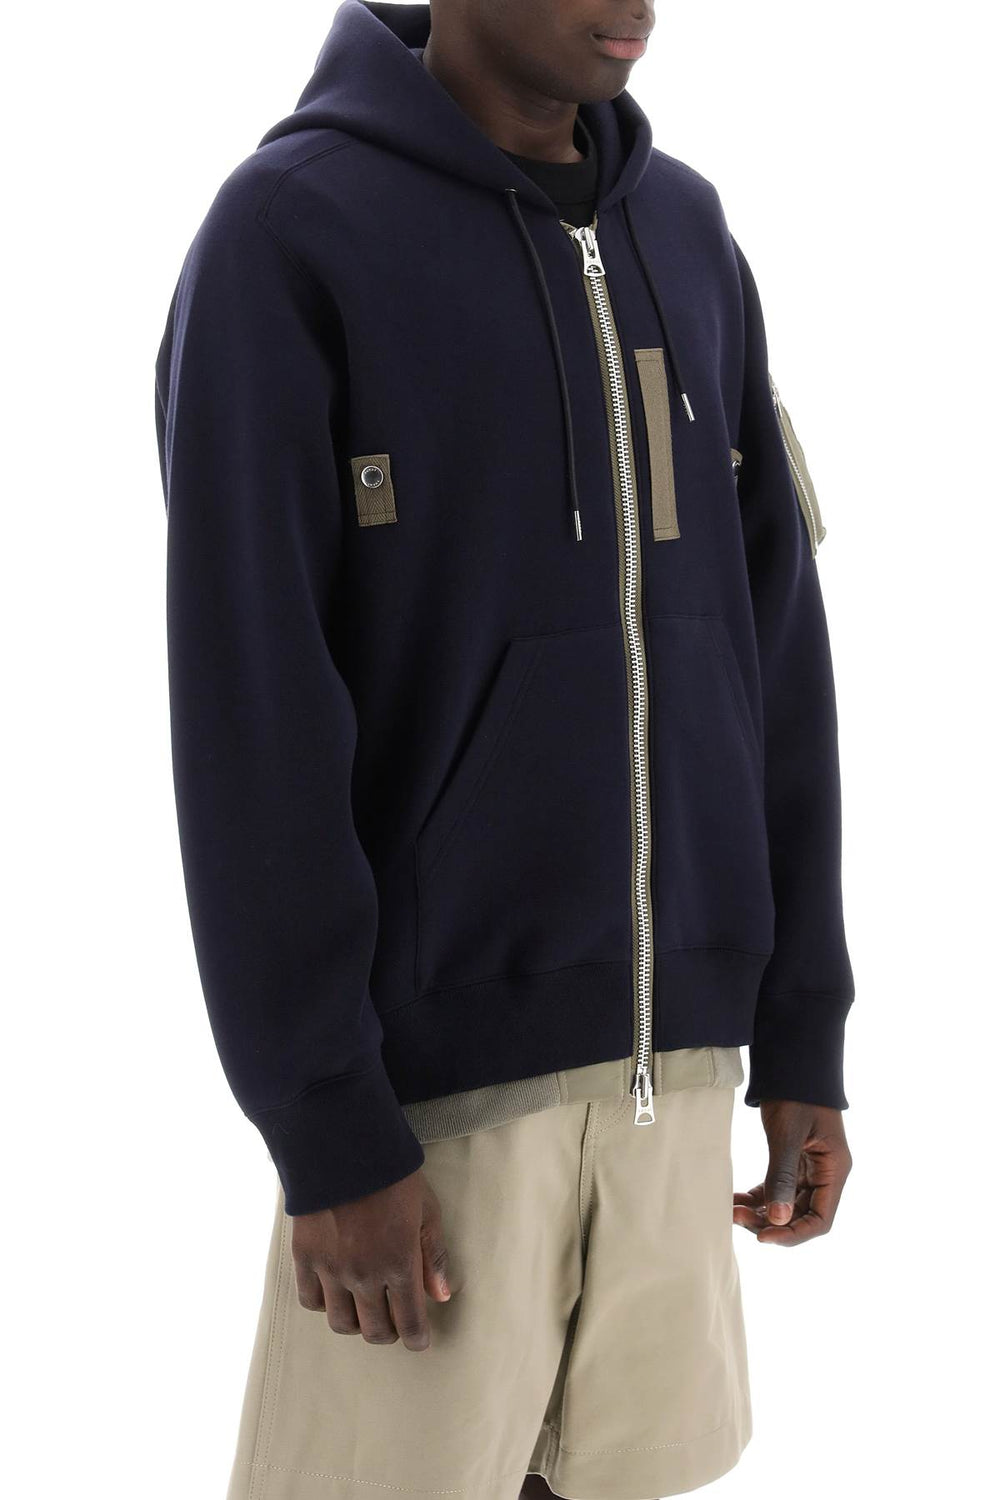 Sacai full zip hoodie with contrast trims-1